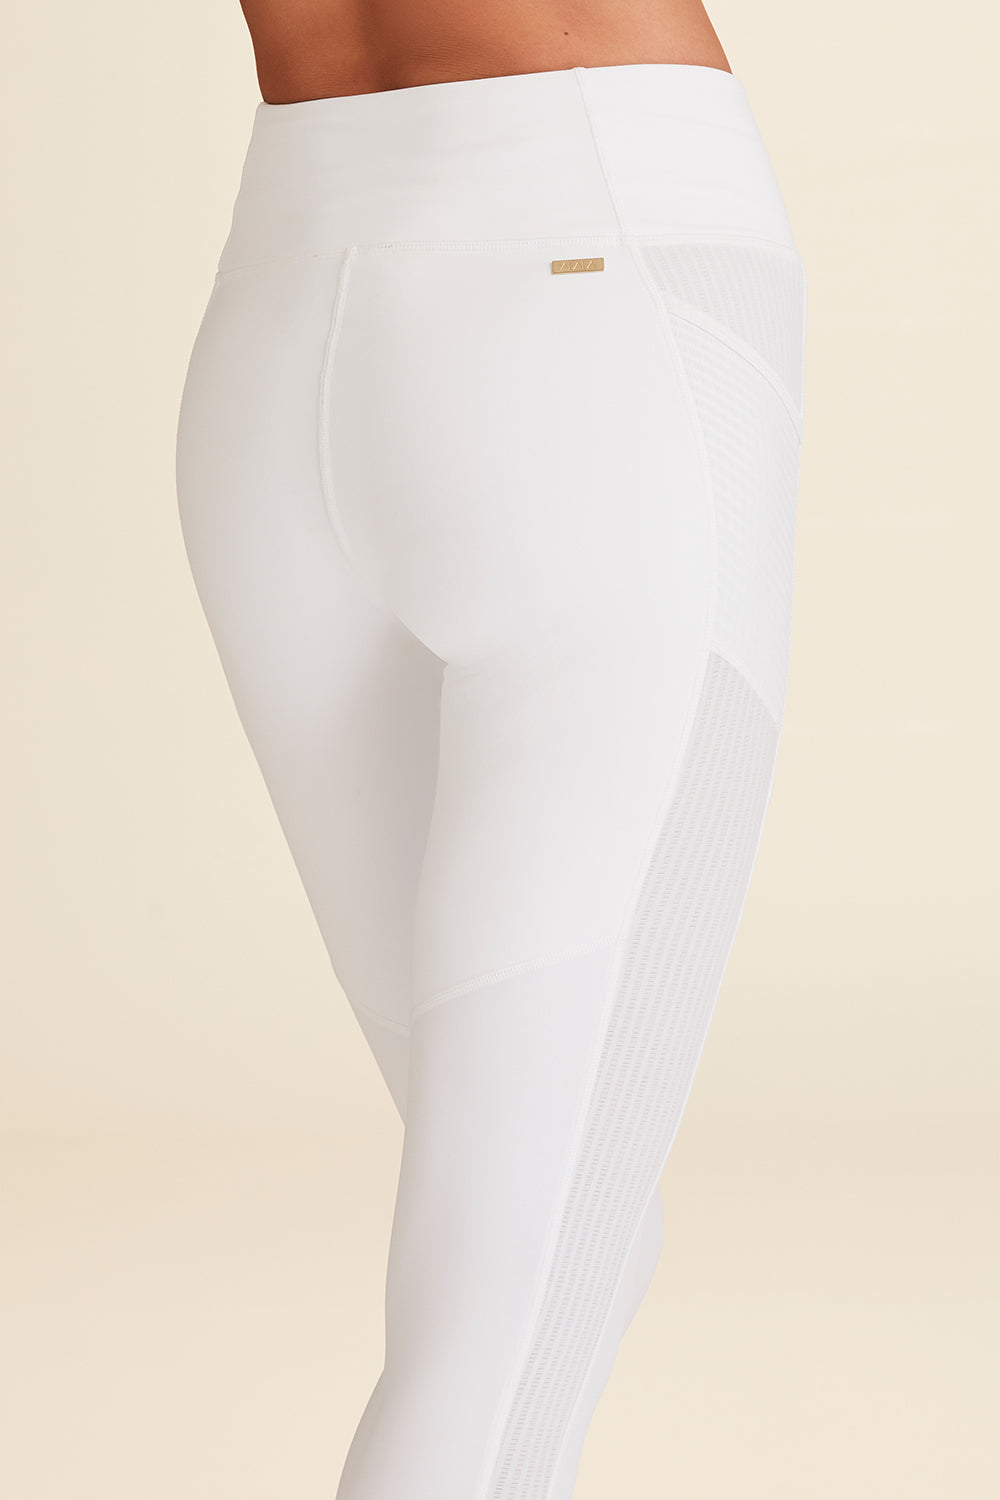 Closeup of lower body of woman modeling white Mirage Tight to show fit around backside